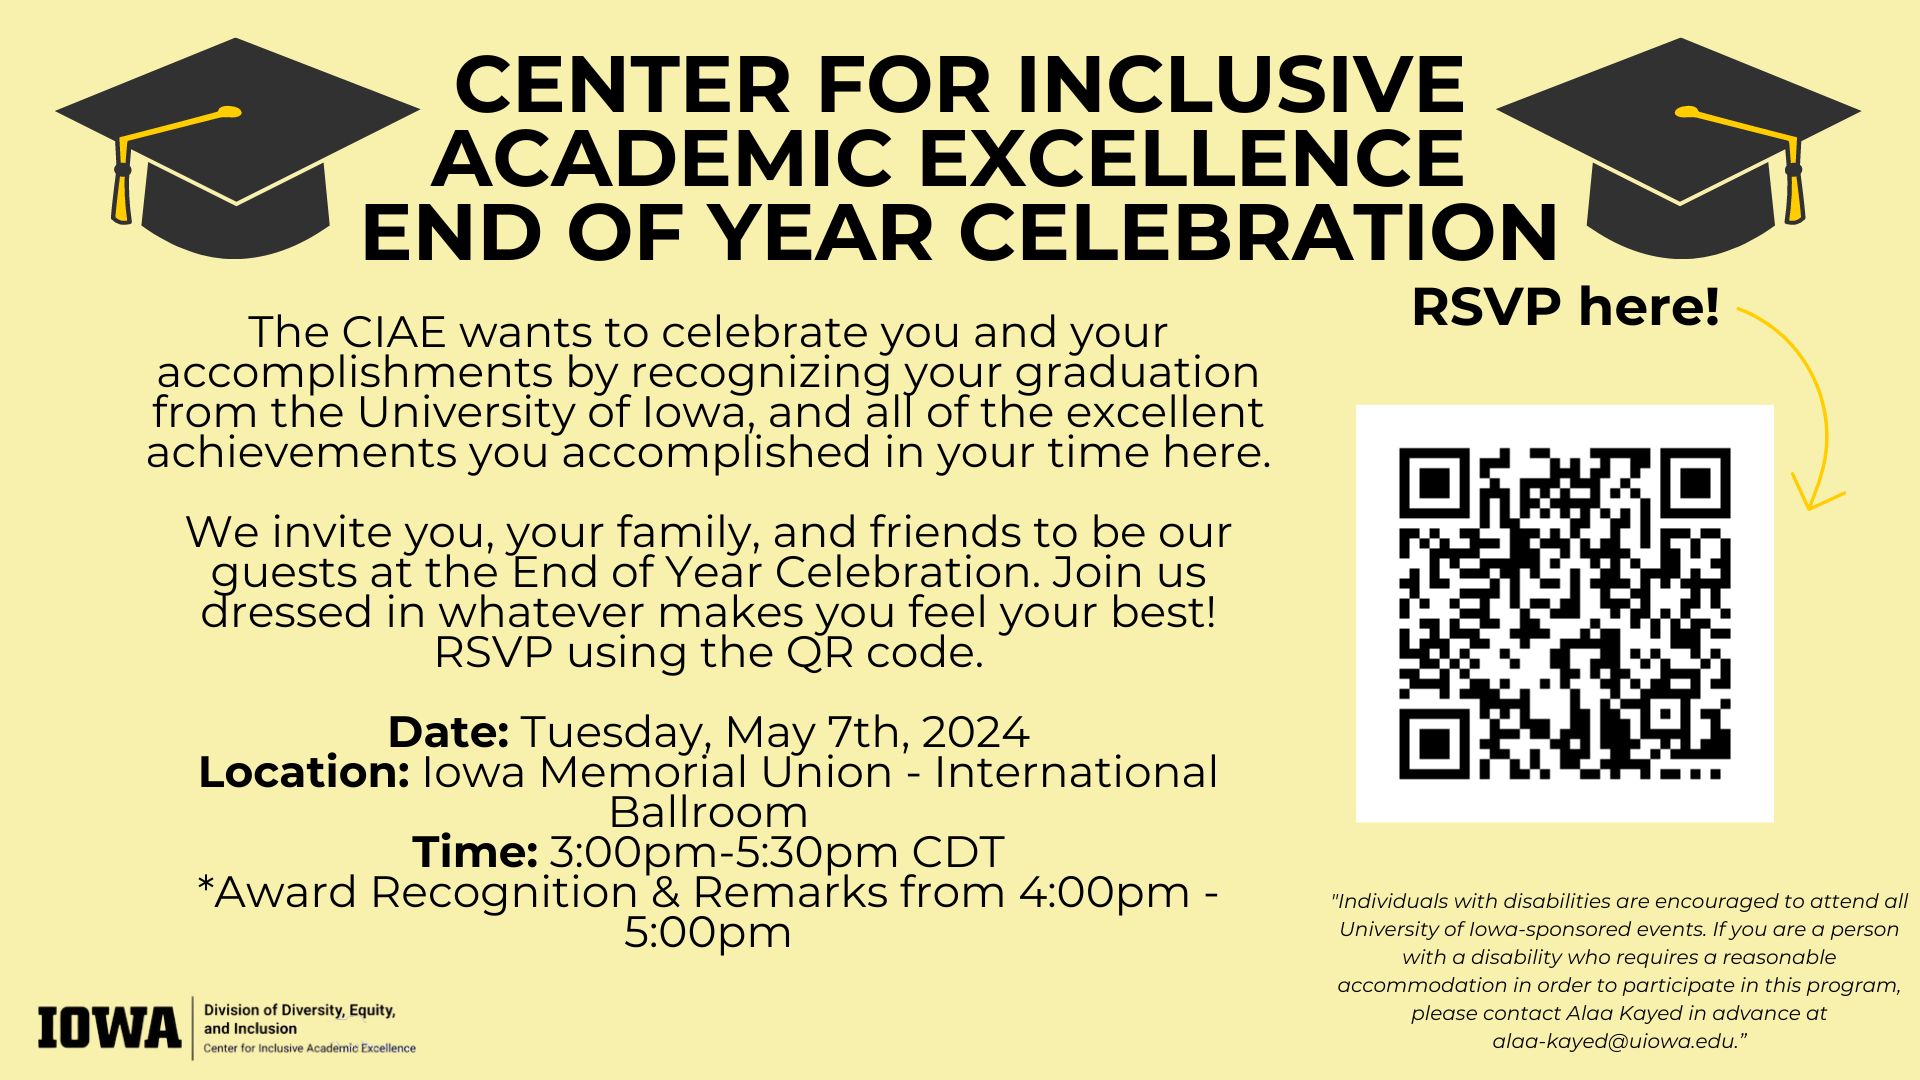 Center for Inclusive Academic Excellence End of Year Celebration! Date: May 7; Location: IMU International Ballroom; Time: 3-5:30pm; RSVP using the qr code